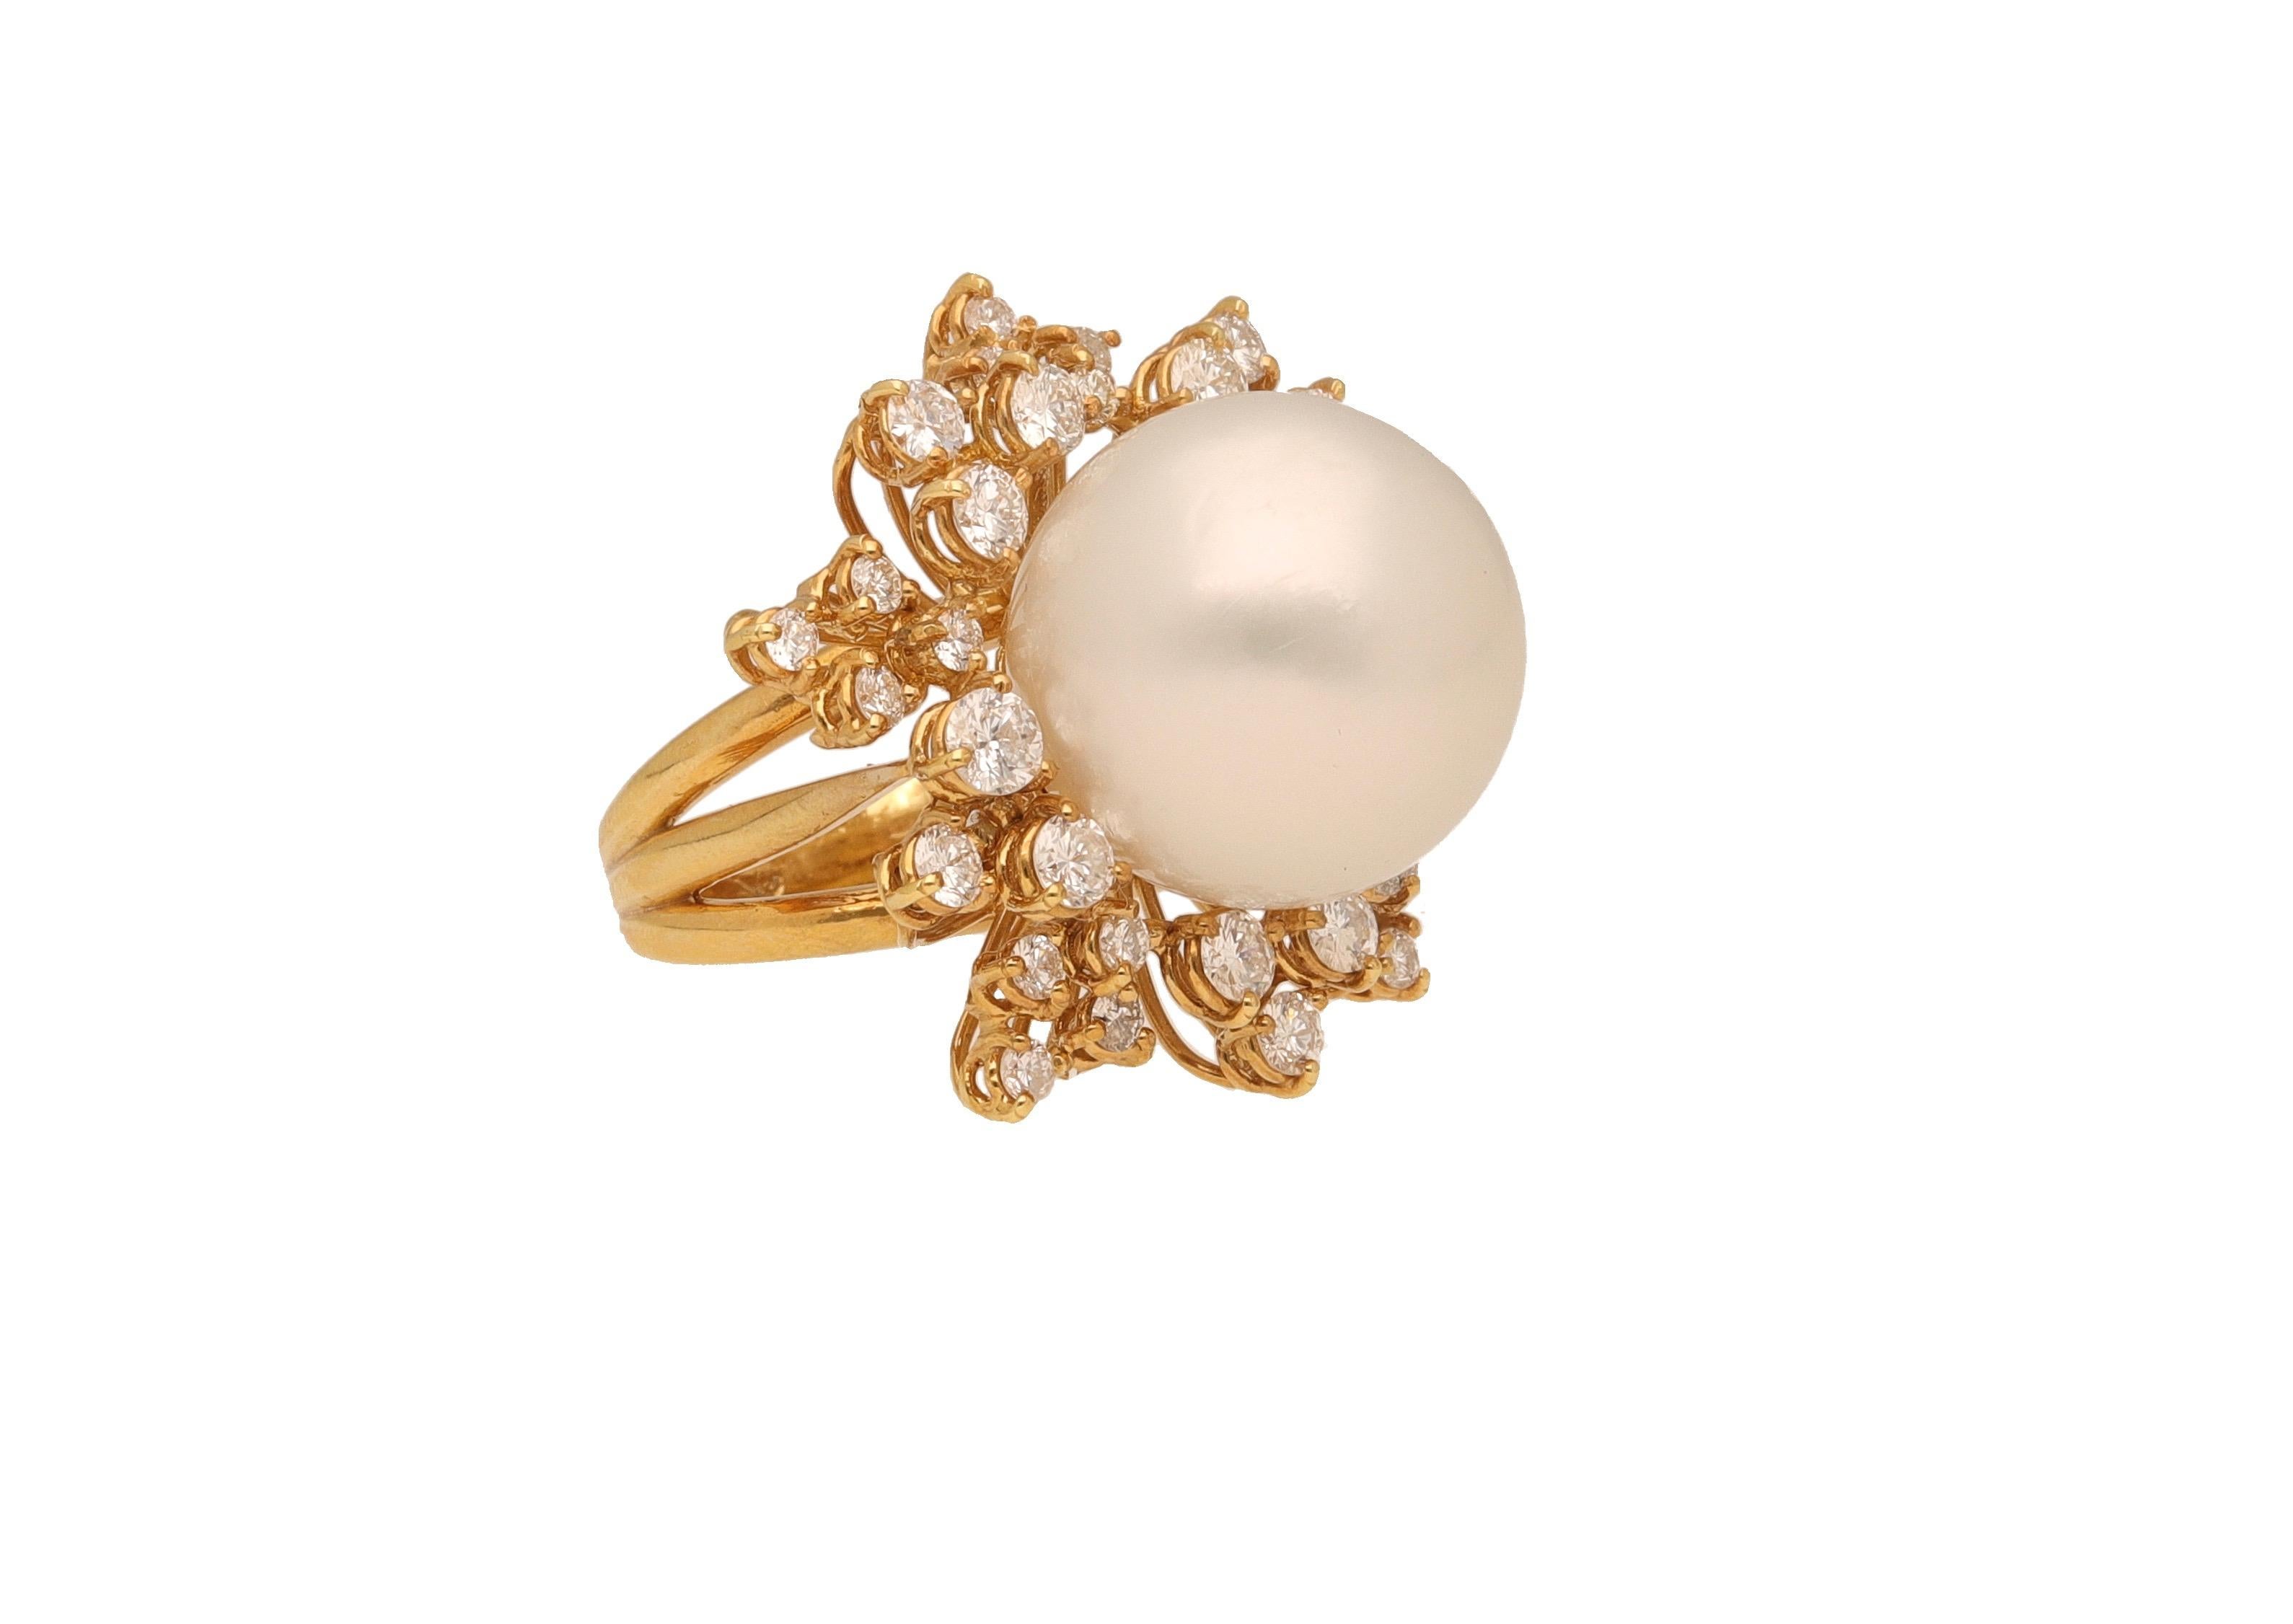 18 kt. yellow gold ring with 2.25 carats of round-cut diamonds ( Color H-I / VVS1-VVS2 ) and 16 mm. round South Sea Pearl.
This beautiful ring is hand-made in Italy.
The ring is resizable.
1980 ca.
Actual size 7.5
Weight gr. 17.80
